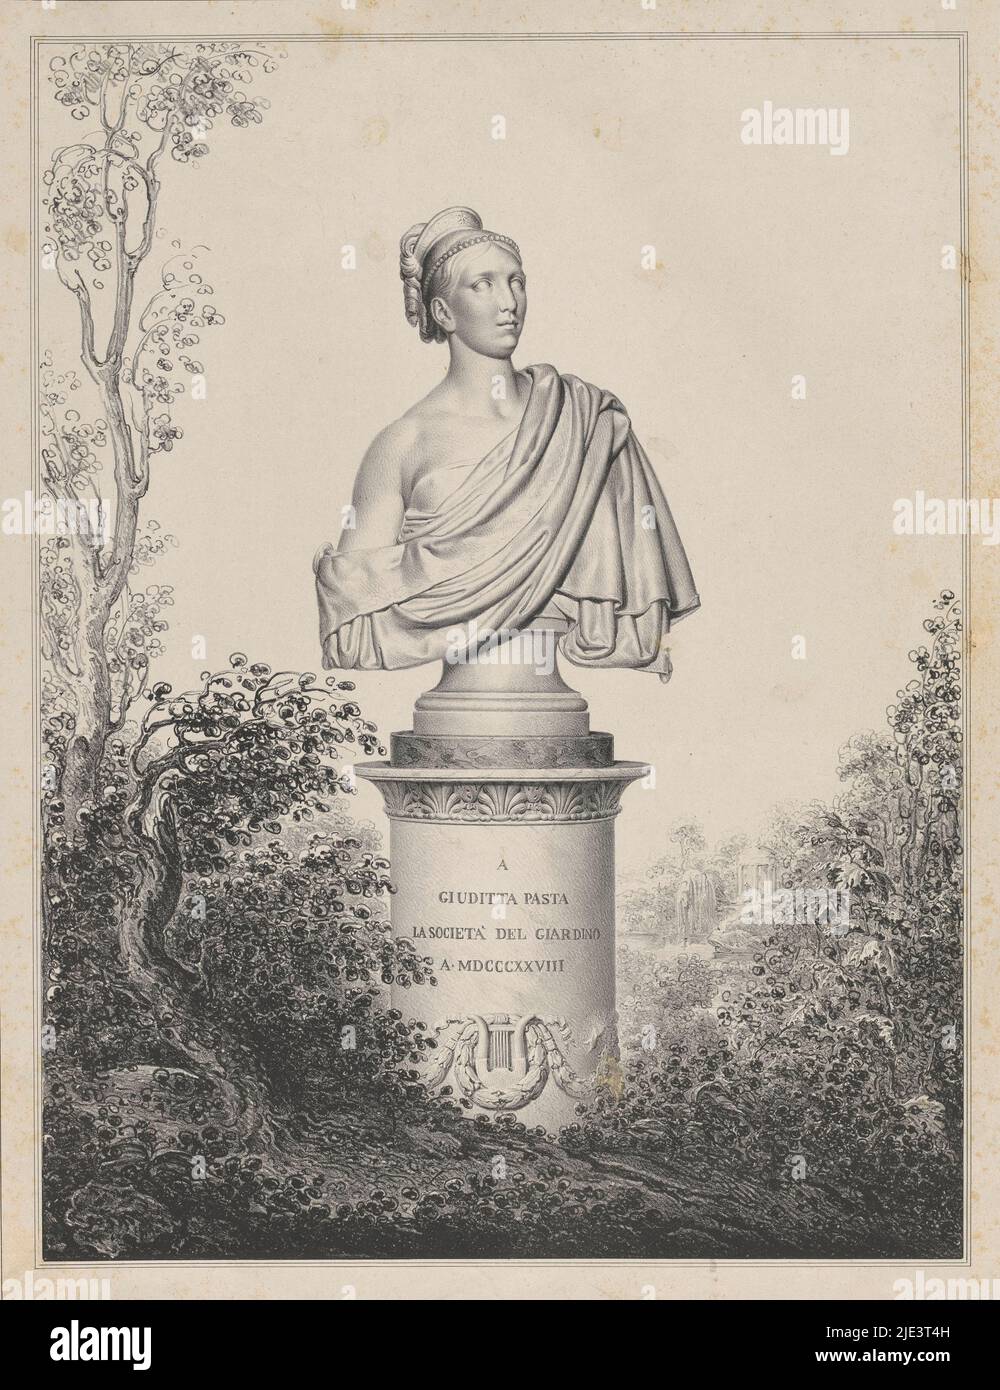 Landscape with the tomb for the opera singer Giuditta Pasta The monument consists of a base with a portrait bust of Giuditta Pasta on top, Tomb of opera singer Giuditta Pasta, print maker: Michele Bisi, (mentioned on object), printer: Vassalli, print maker: Italy, printer: Milaan, 1798 - 1874, paper, h 537 mm × w 392 mm Stock Photo